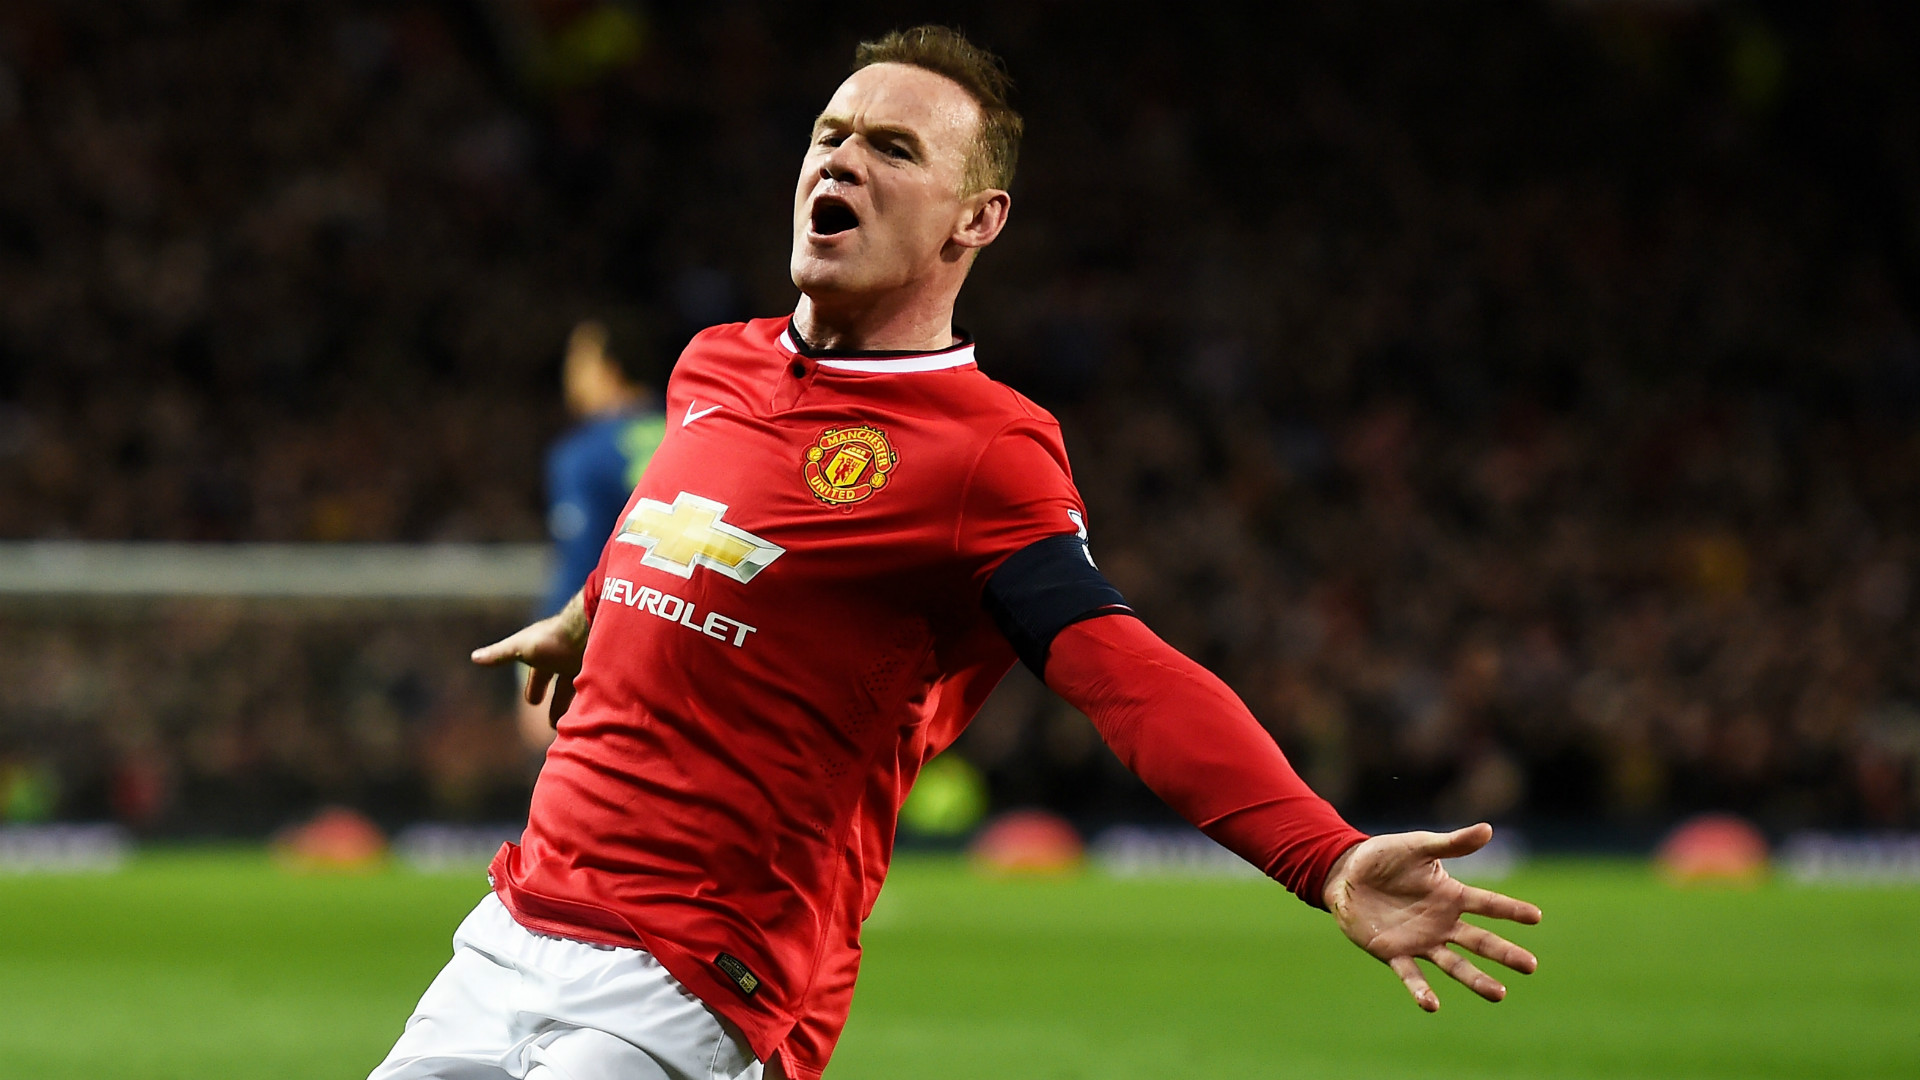 Wayne Rooney documentary: How to watch, release date & full details